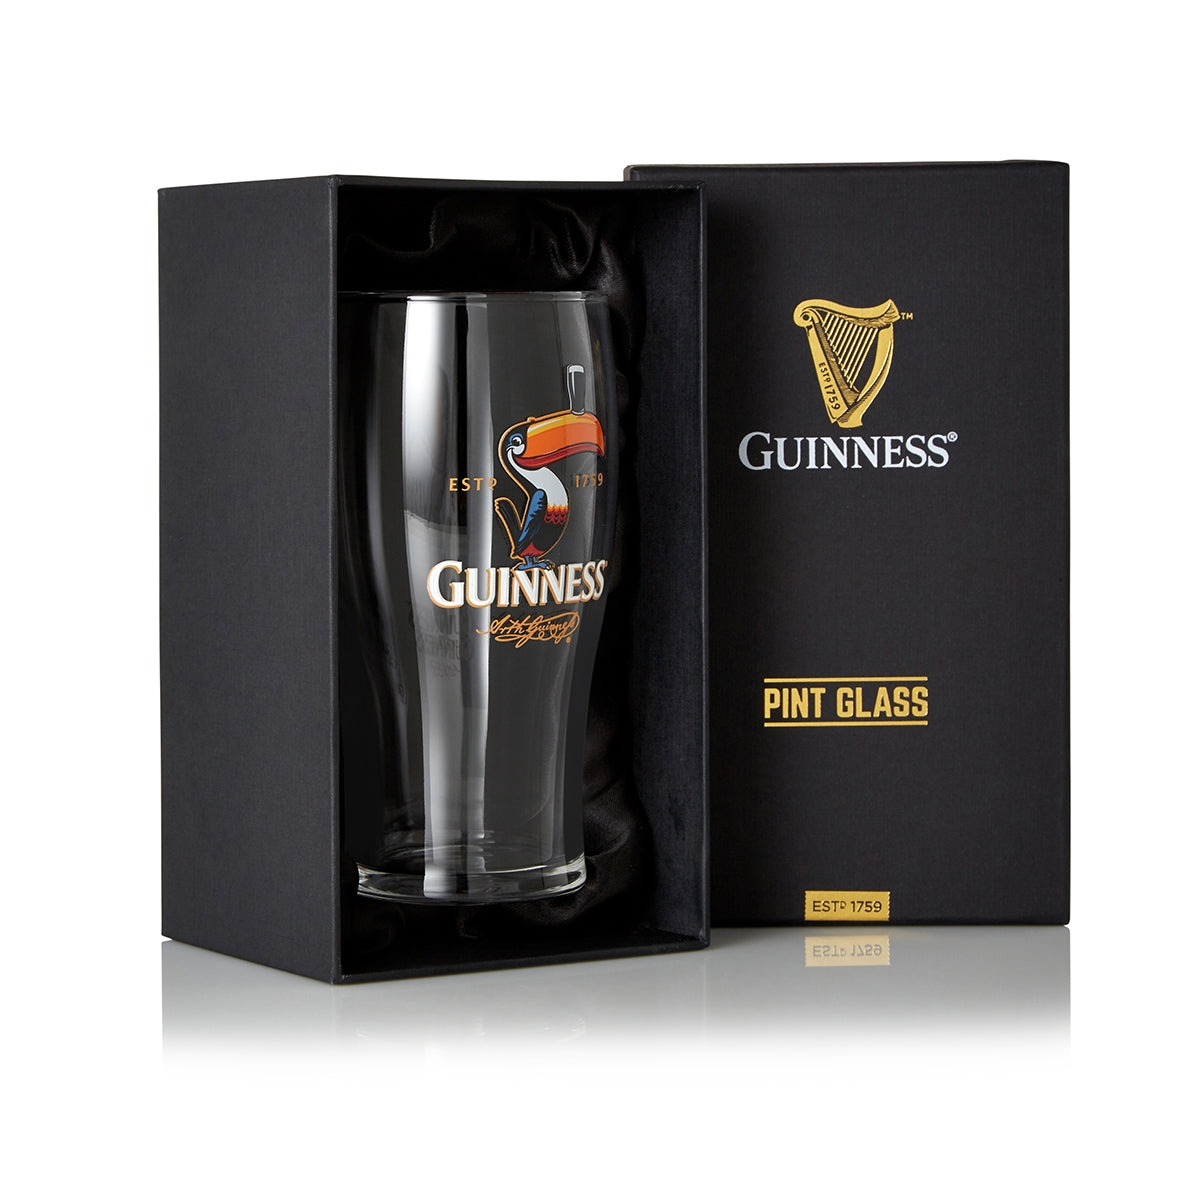 Guinness Toucan Personalized Pint Glass in Gift Box